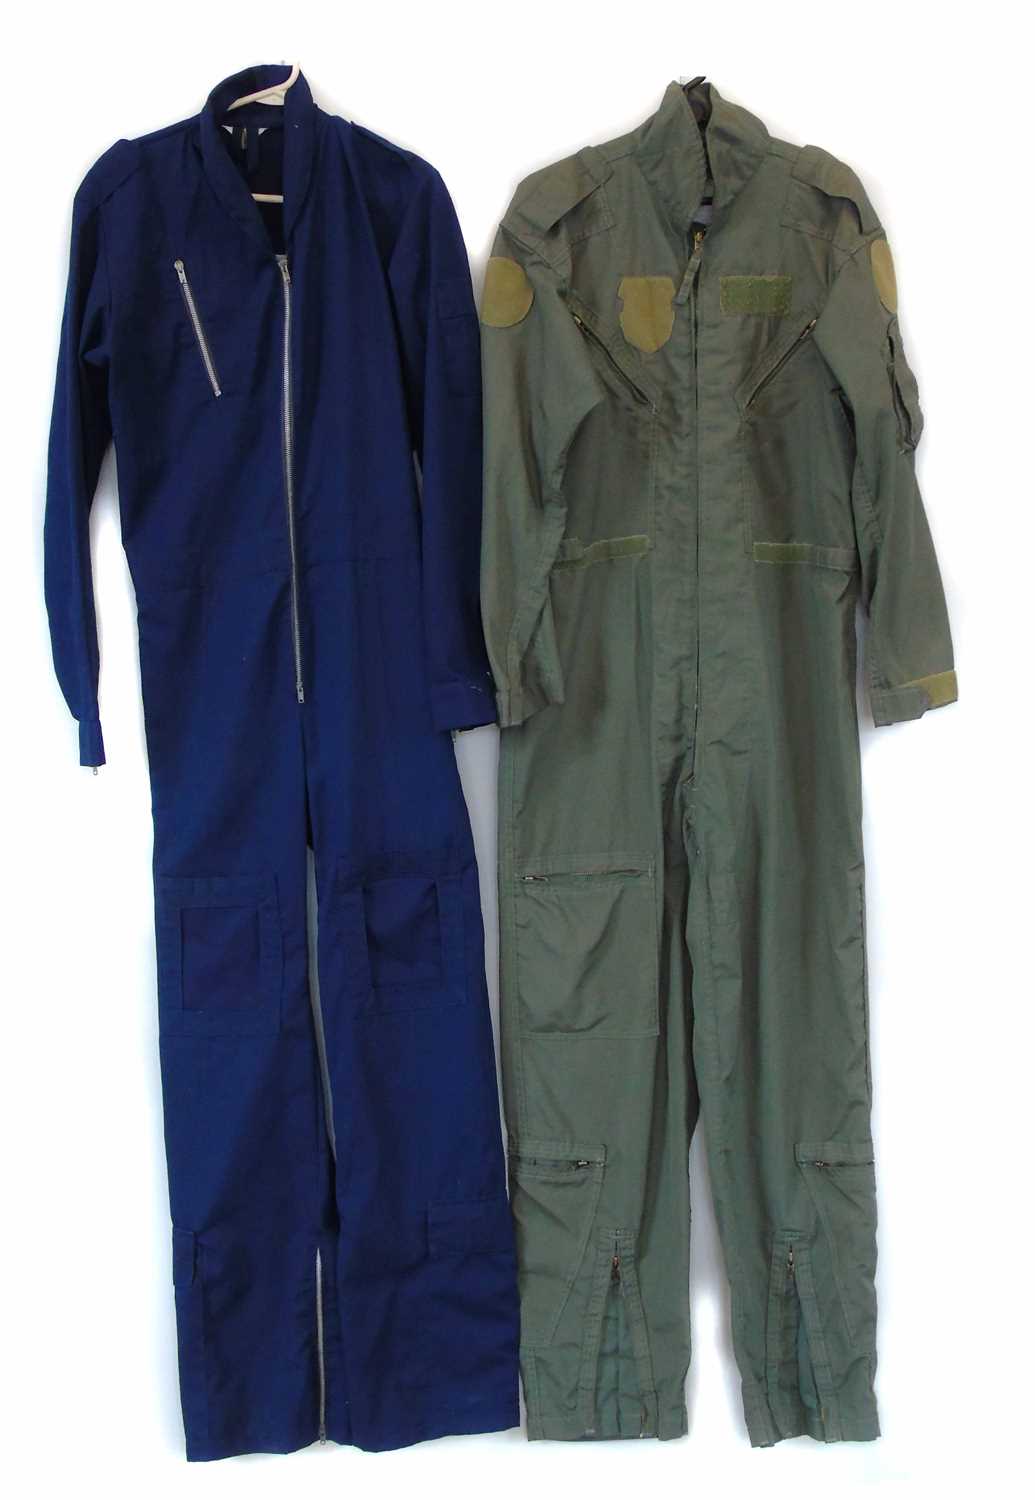 Lot 205 - Two Nomex cotton flying suits, size 44 large.